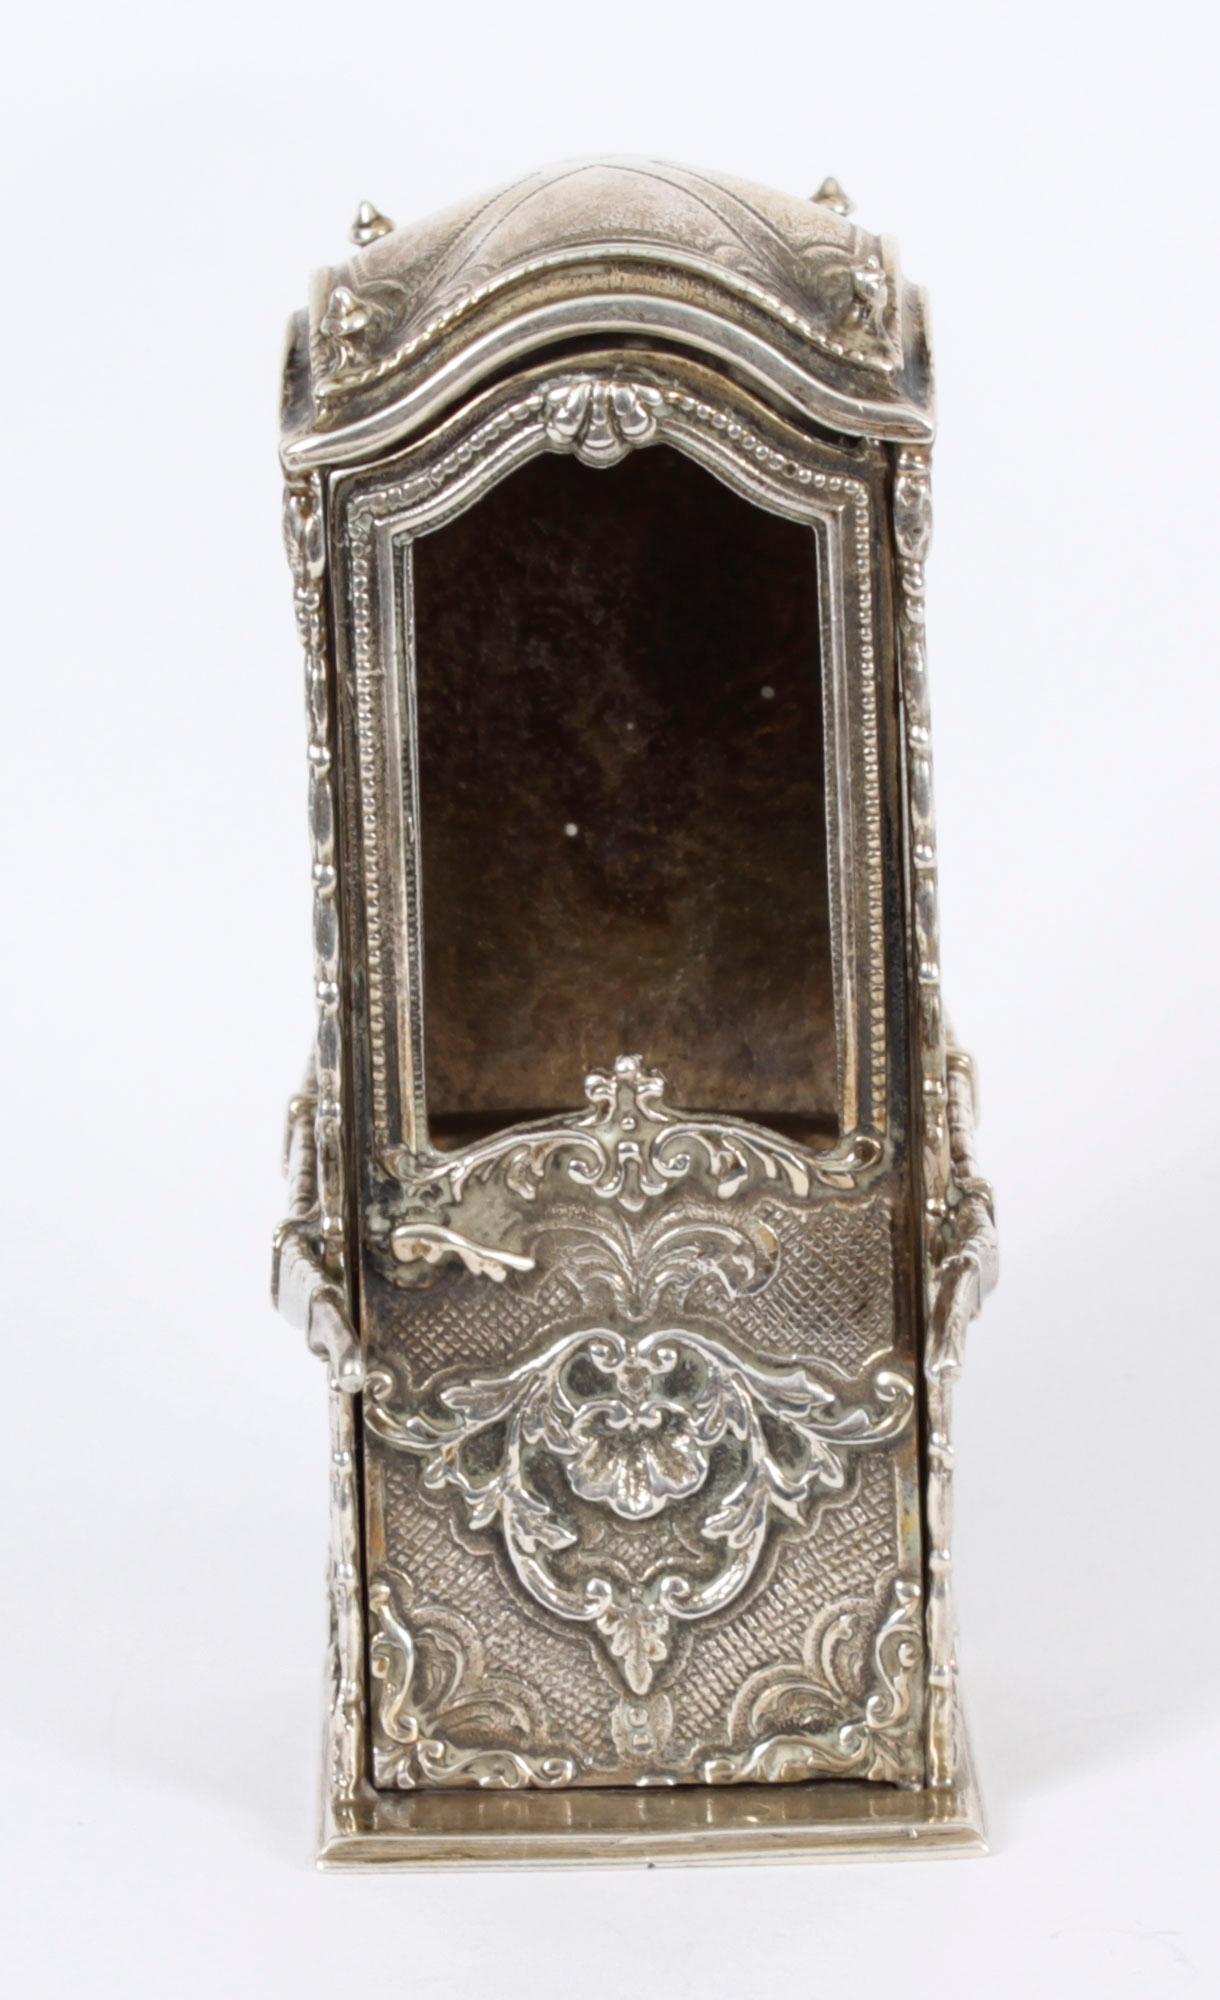 AntiqueFrench Silver Miniature Sedan Chair 19th Century For Sale 2